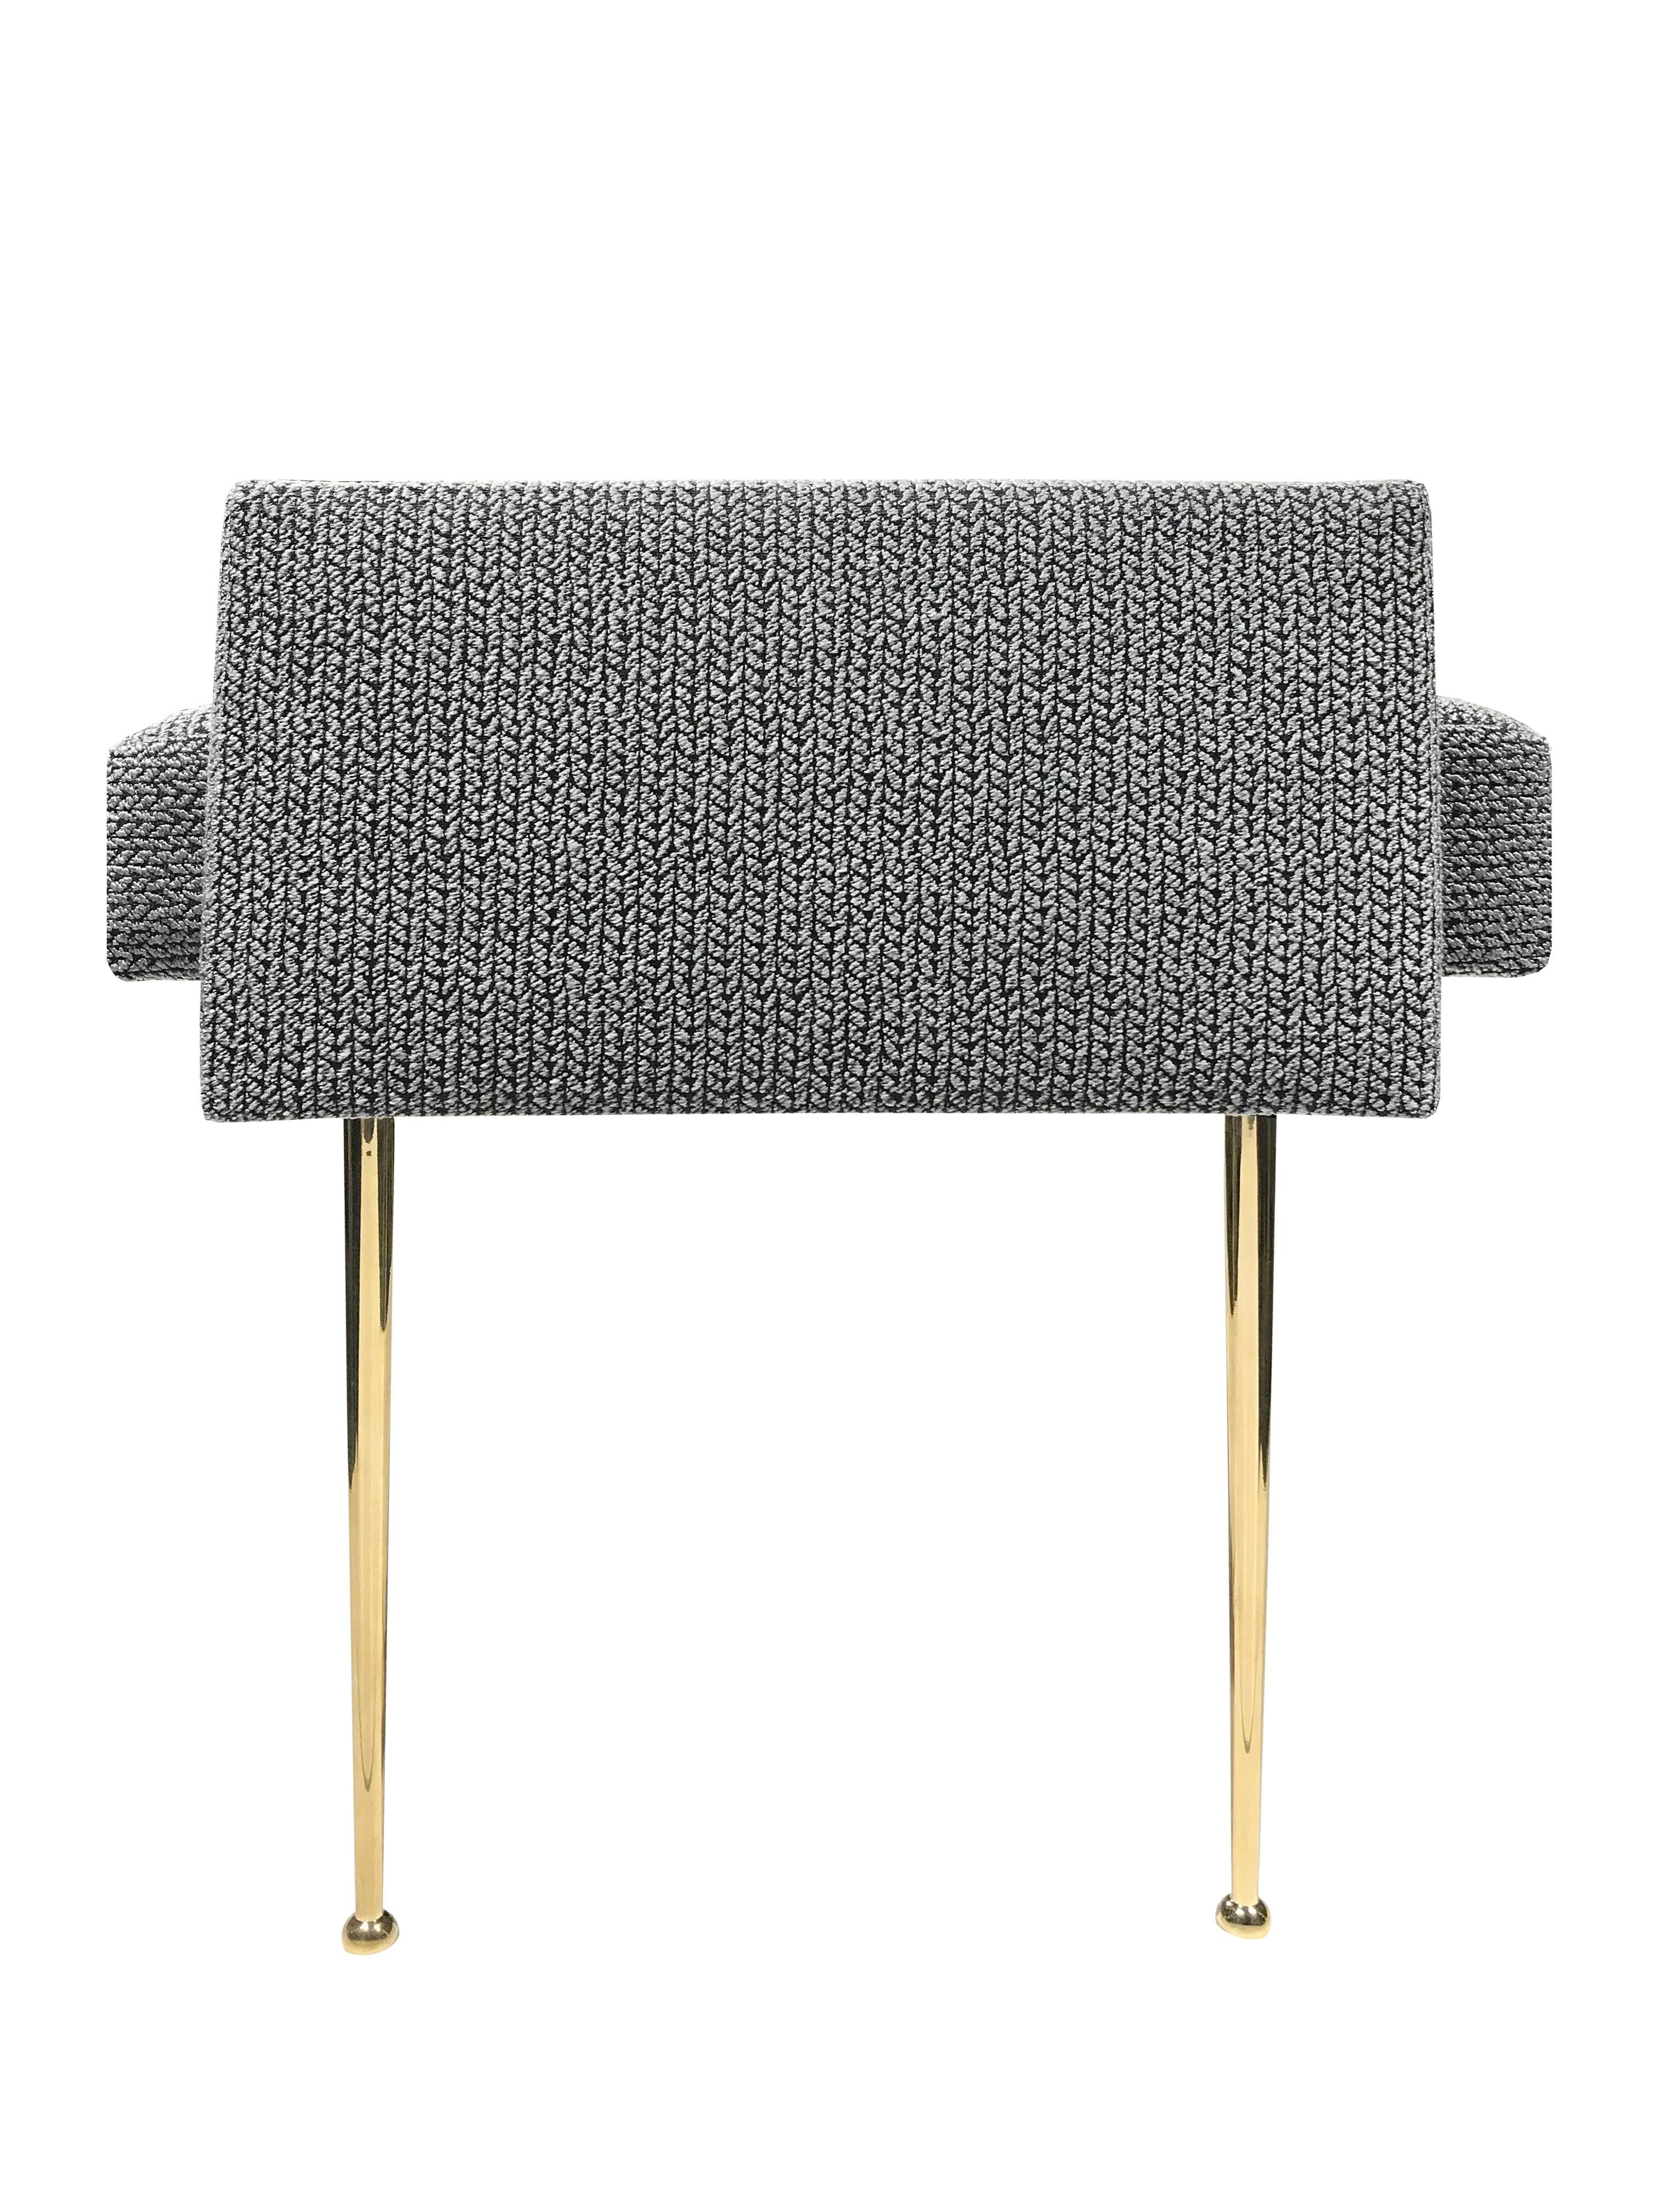 The Madison Arms bench, designed by Irwin Feld for CF Modern, has a plain cushion with two rectangular arms on either side. It stands on four polished brass Madison legs. 

CF Modern merchandise is available in custom sizes, wood and hardware